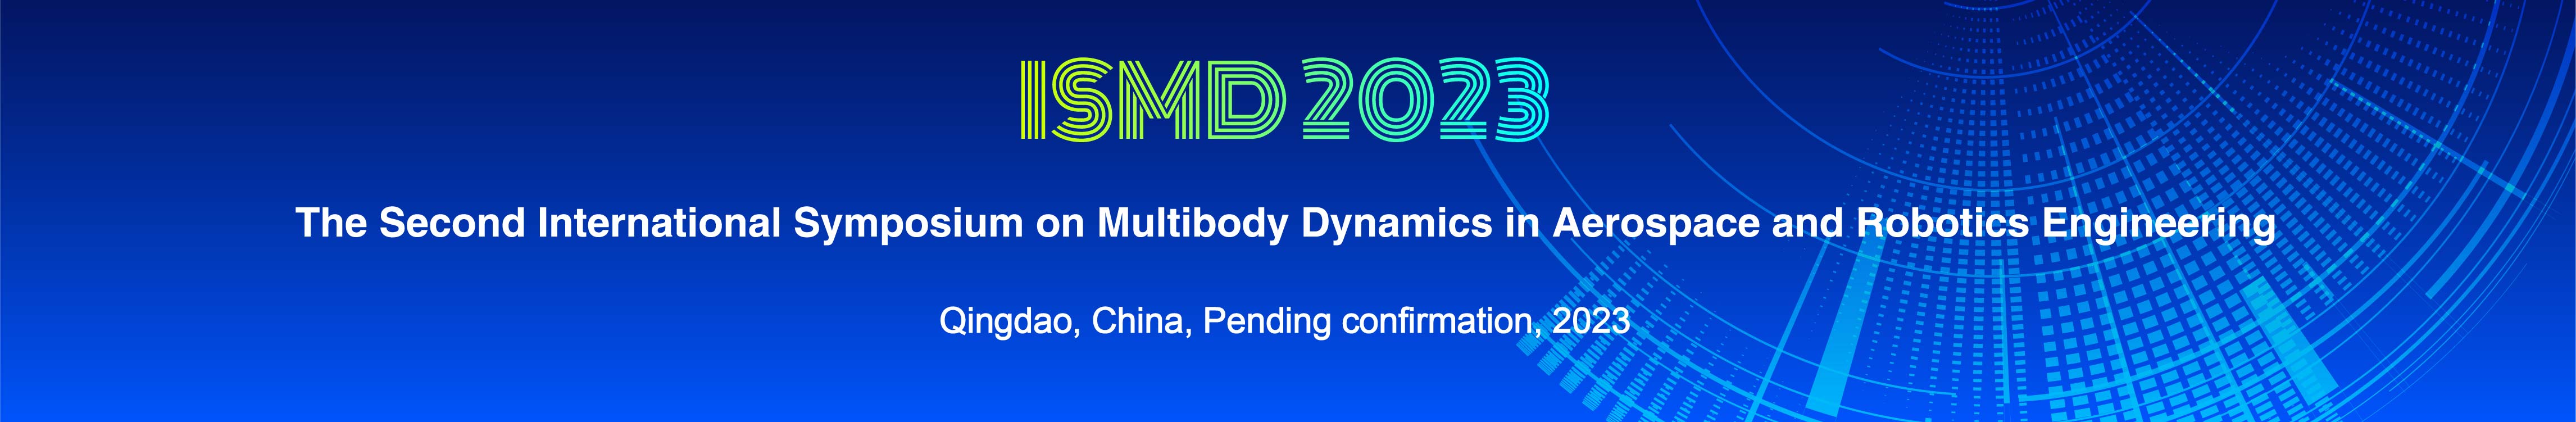 ISMD 2023